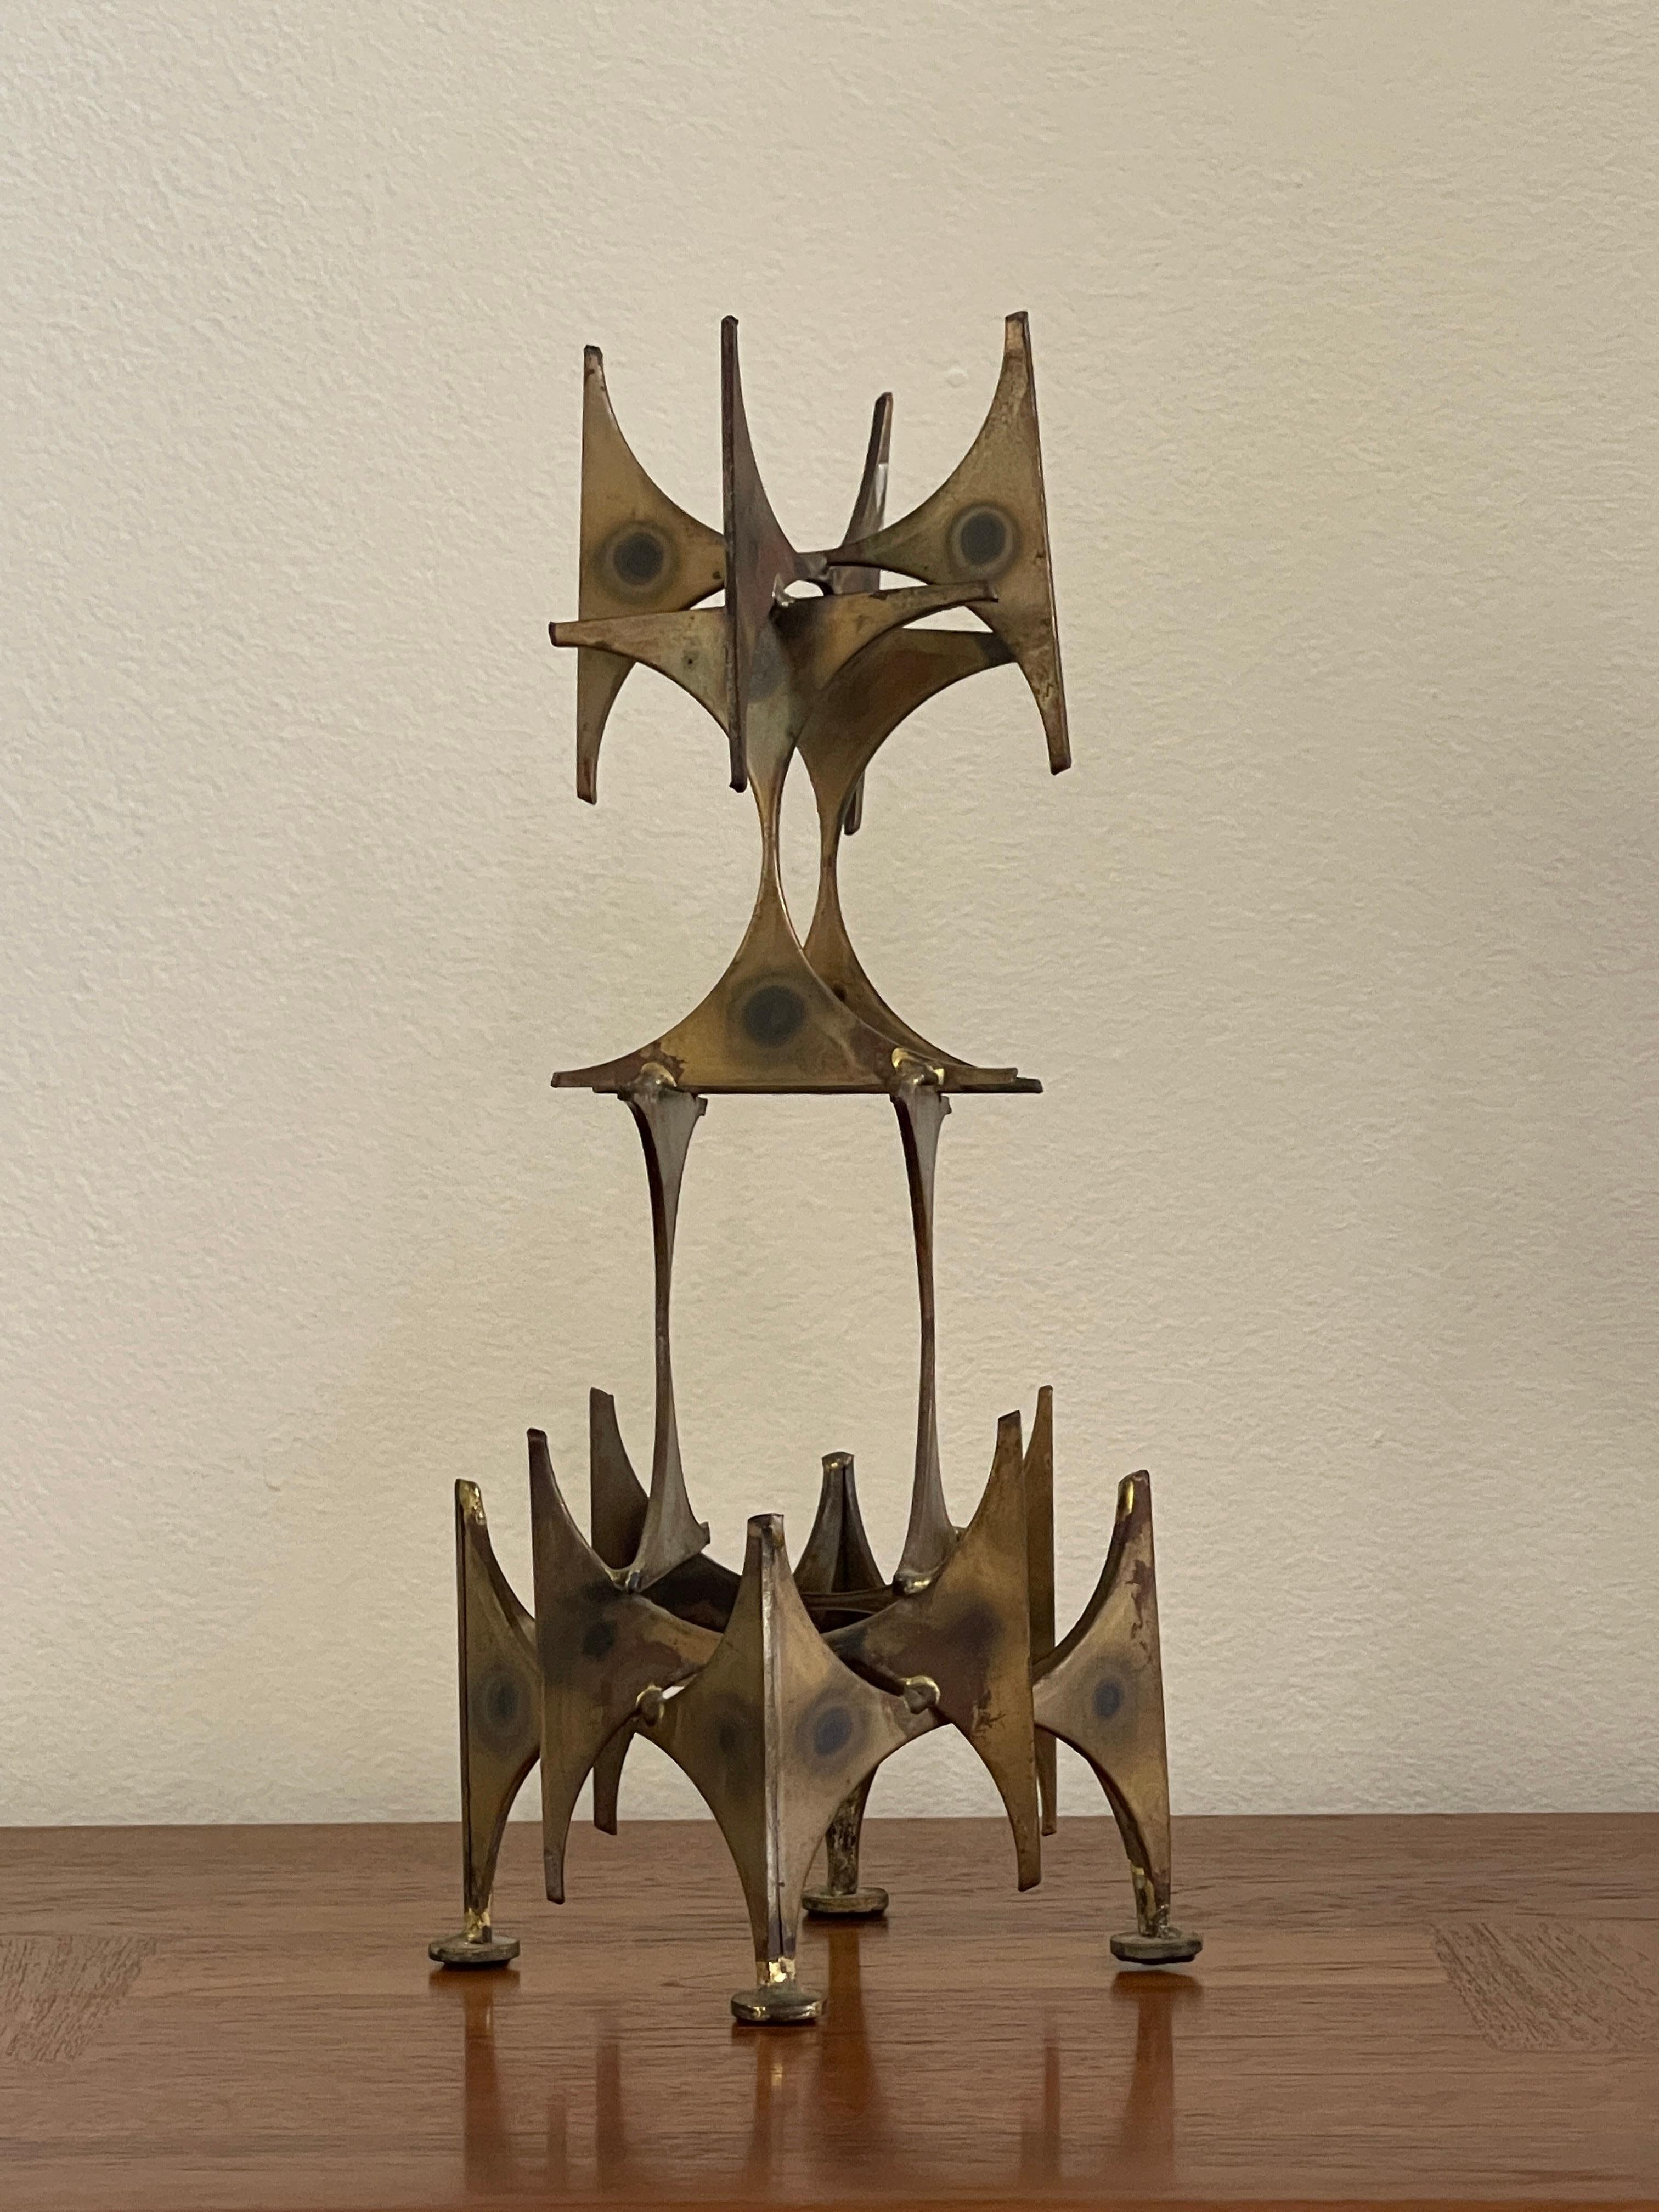 20th century Marc Creates Metal sculpture by Mark Weinstein with original patina. Defined with brass squares and pointy edges. Artist and inventor Mark Weinstein of Saint Louis Missouri, established Marc Creates Inc. in 1967. Mark has been designing